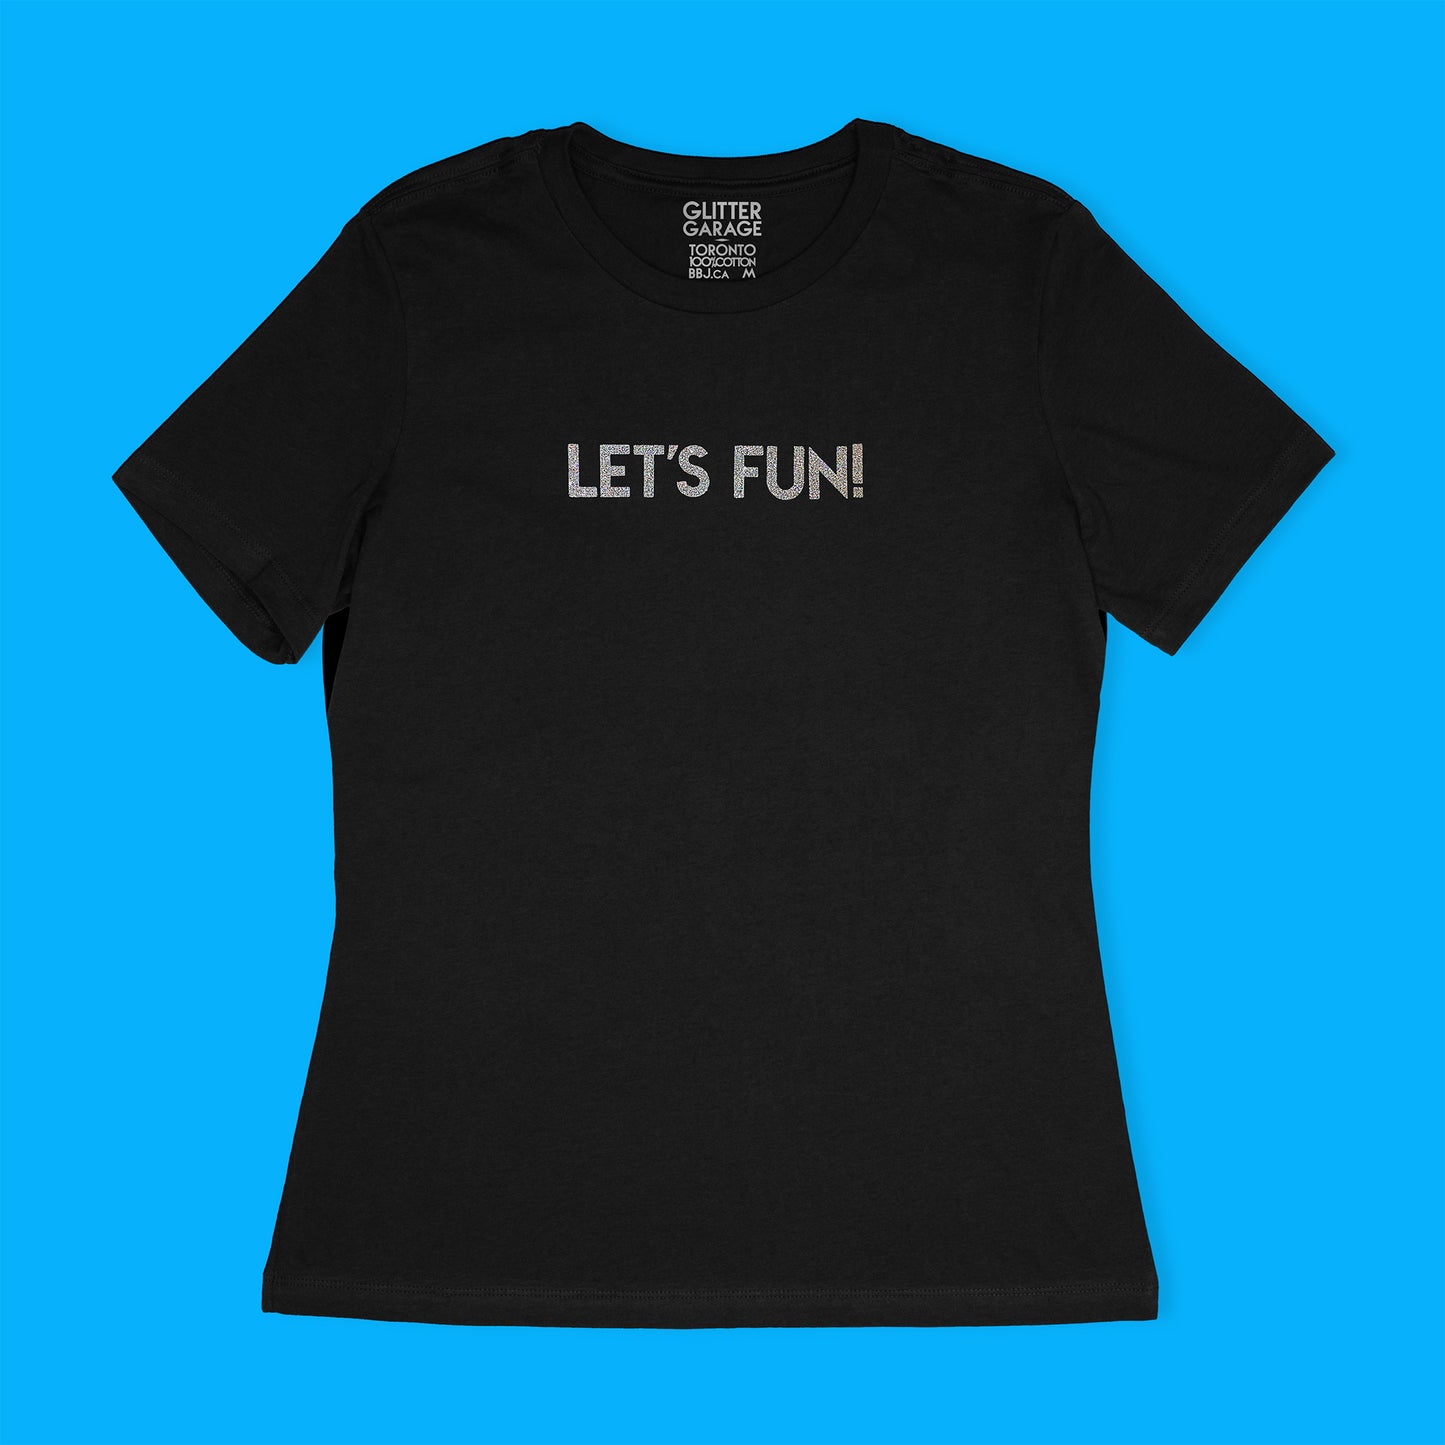 Custom text tee sample - "LET"S FUN!" in silver glitter text - USE YOUR WORDS - black women's relaxed fit cotton t-shirt by BBJ / Glitter Garage